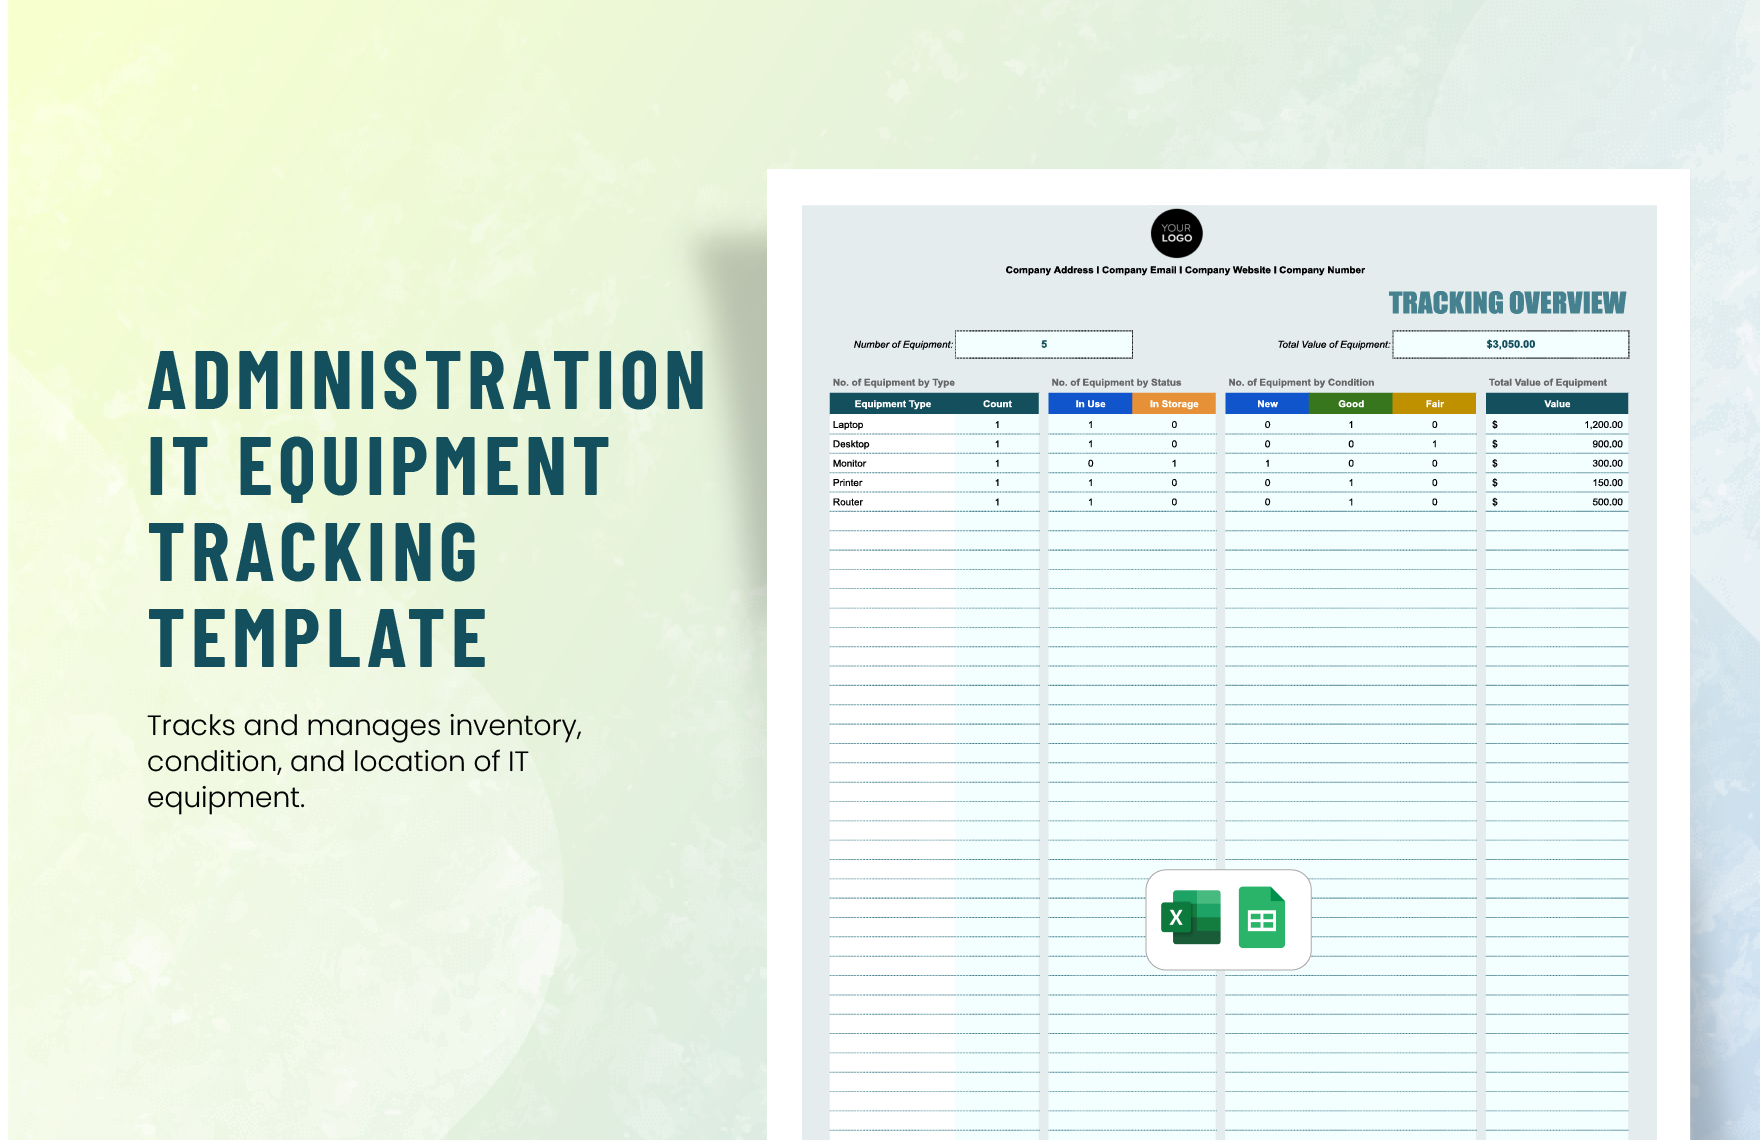 Administration IT Equipment Tracking Template in Excel, Google Sheets